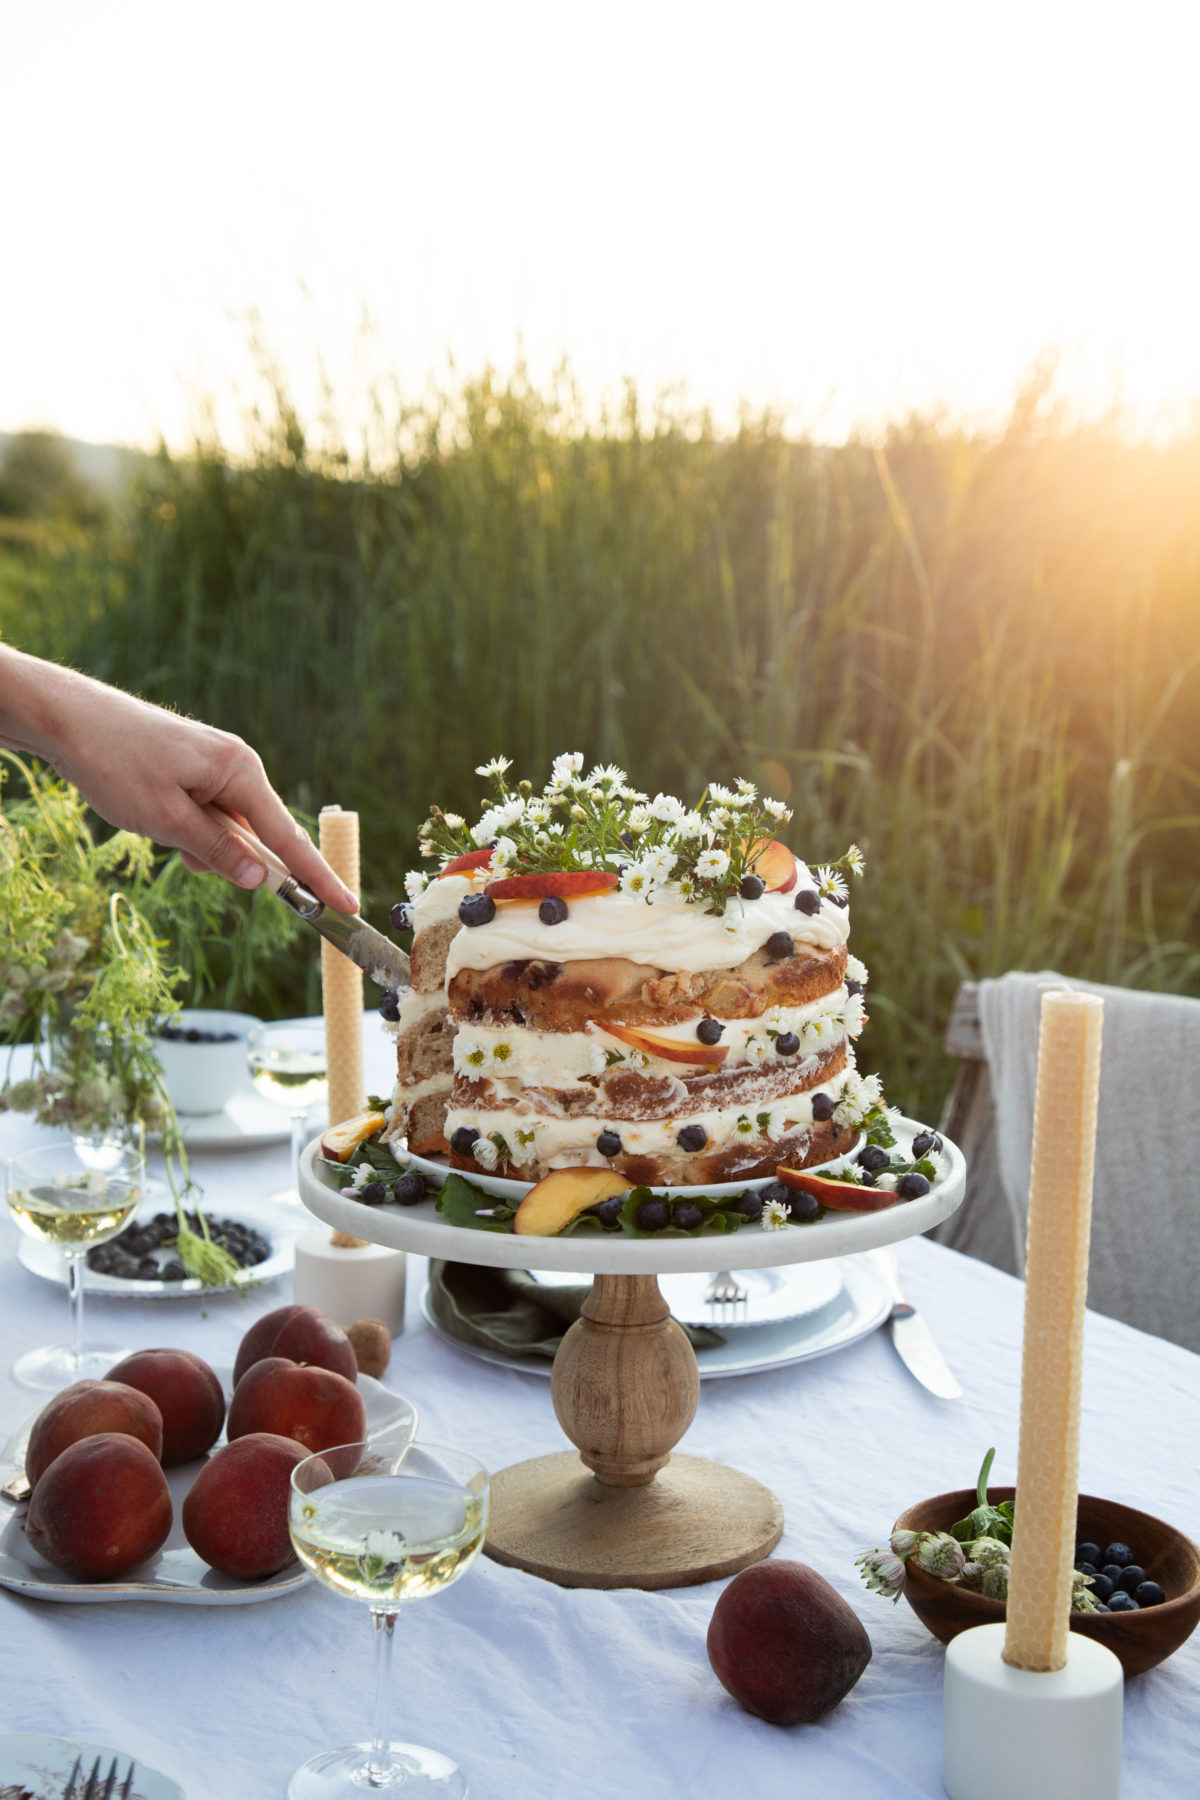 a woman's hand cutting into a cake that's topped with peaches, blueberries, and camomile flowers on a white cloth covered table in a field with peaches and candlesticks on the table as well.